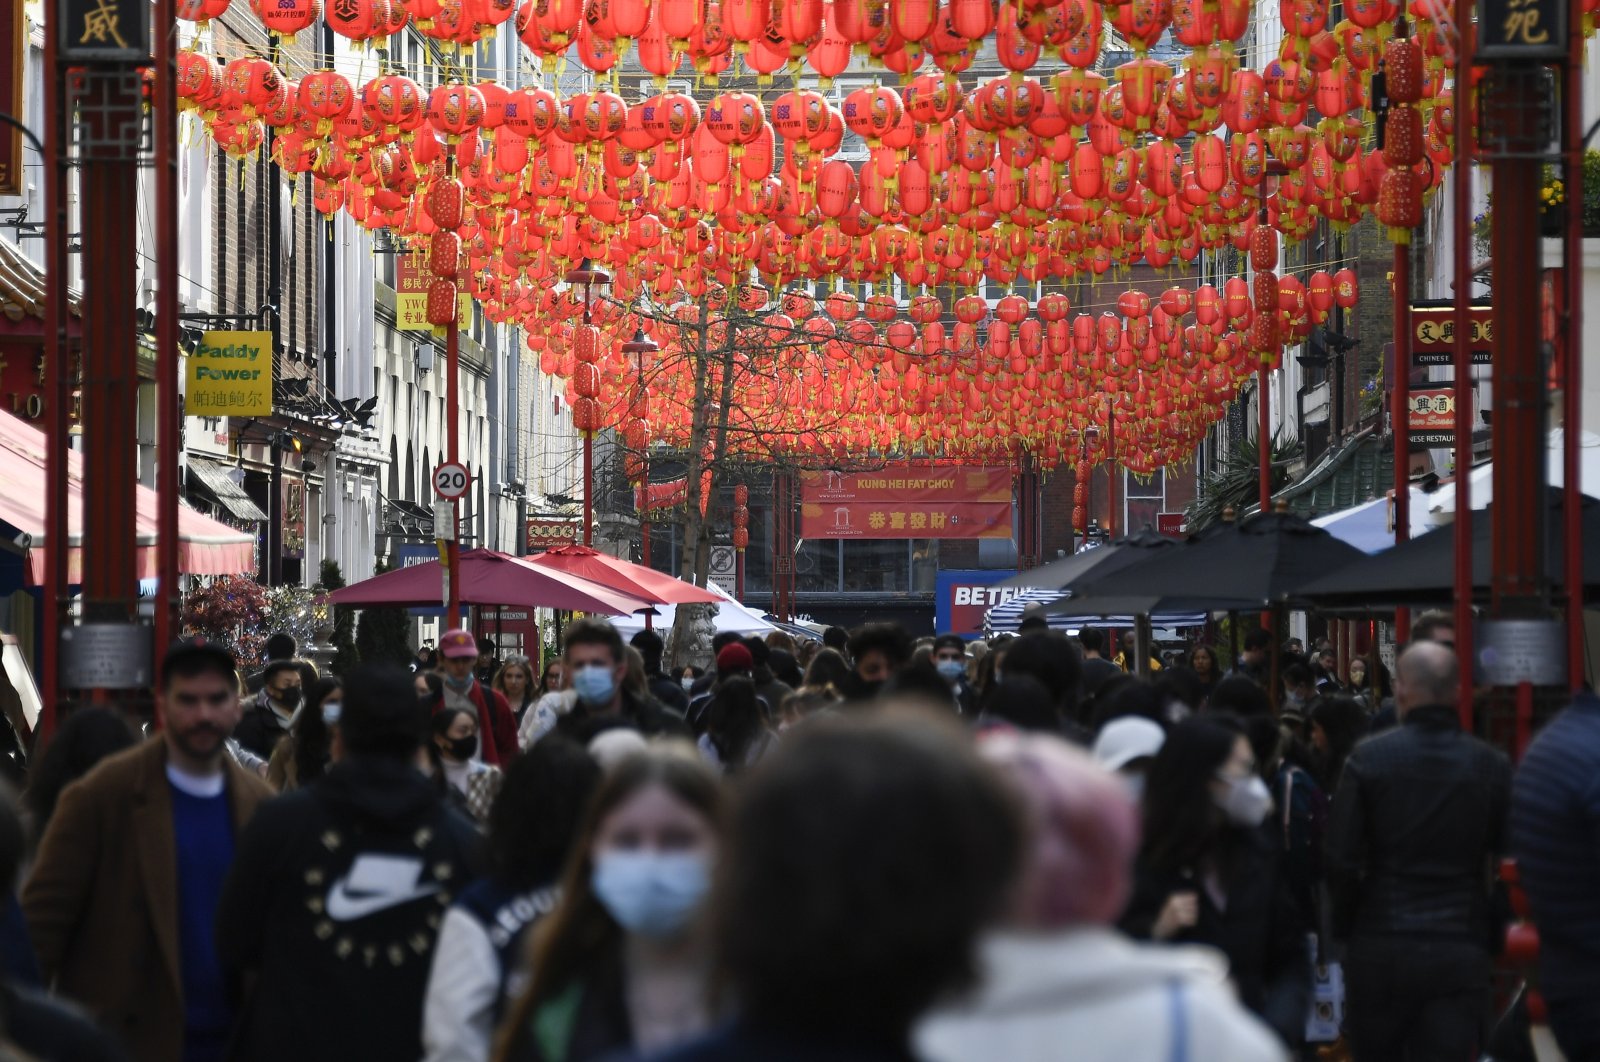 People walk and queue outside restaurants in Chinatown, in London, U.K., April 17, 2021. (AP Photo)

